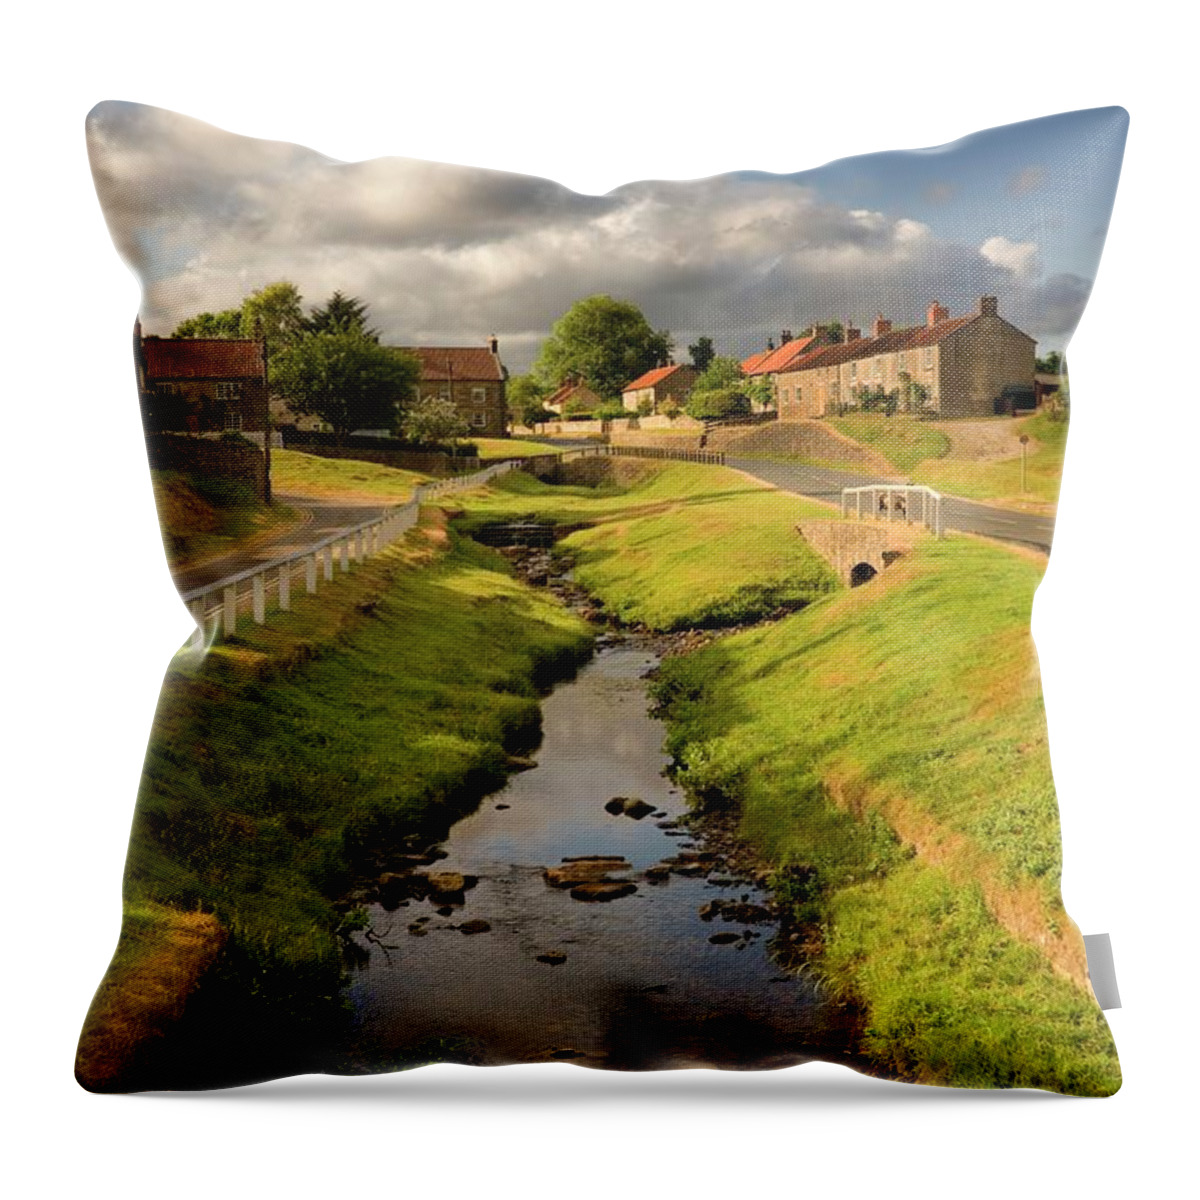 Scenics Throw Pillow featuring the photograph Hutton Le Hole, North Yorkshire, England by Design Pics/john Short